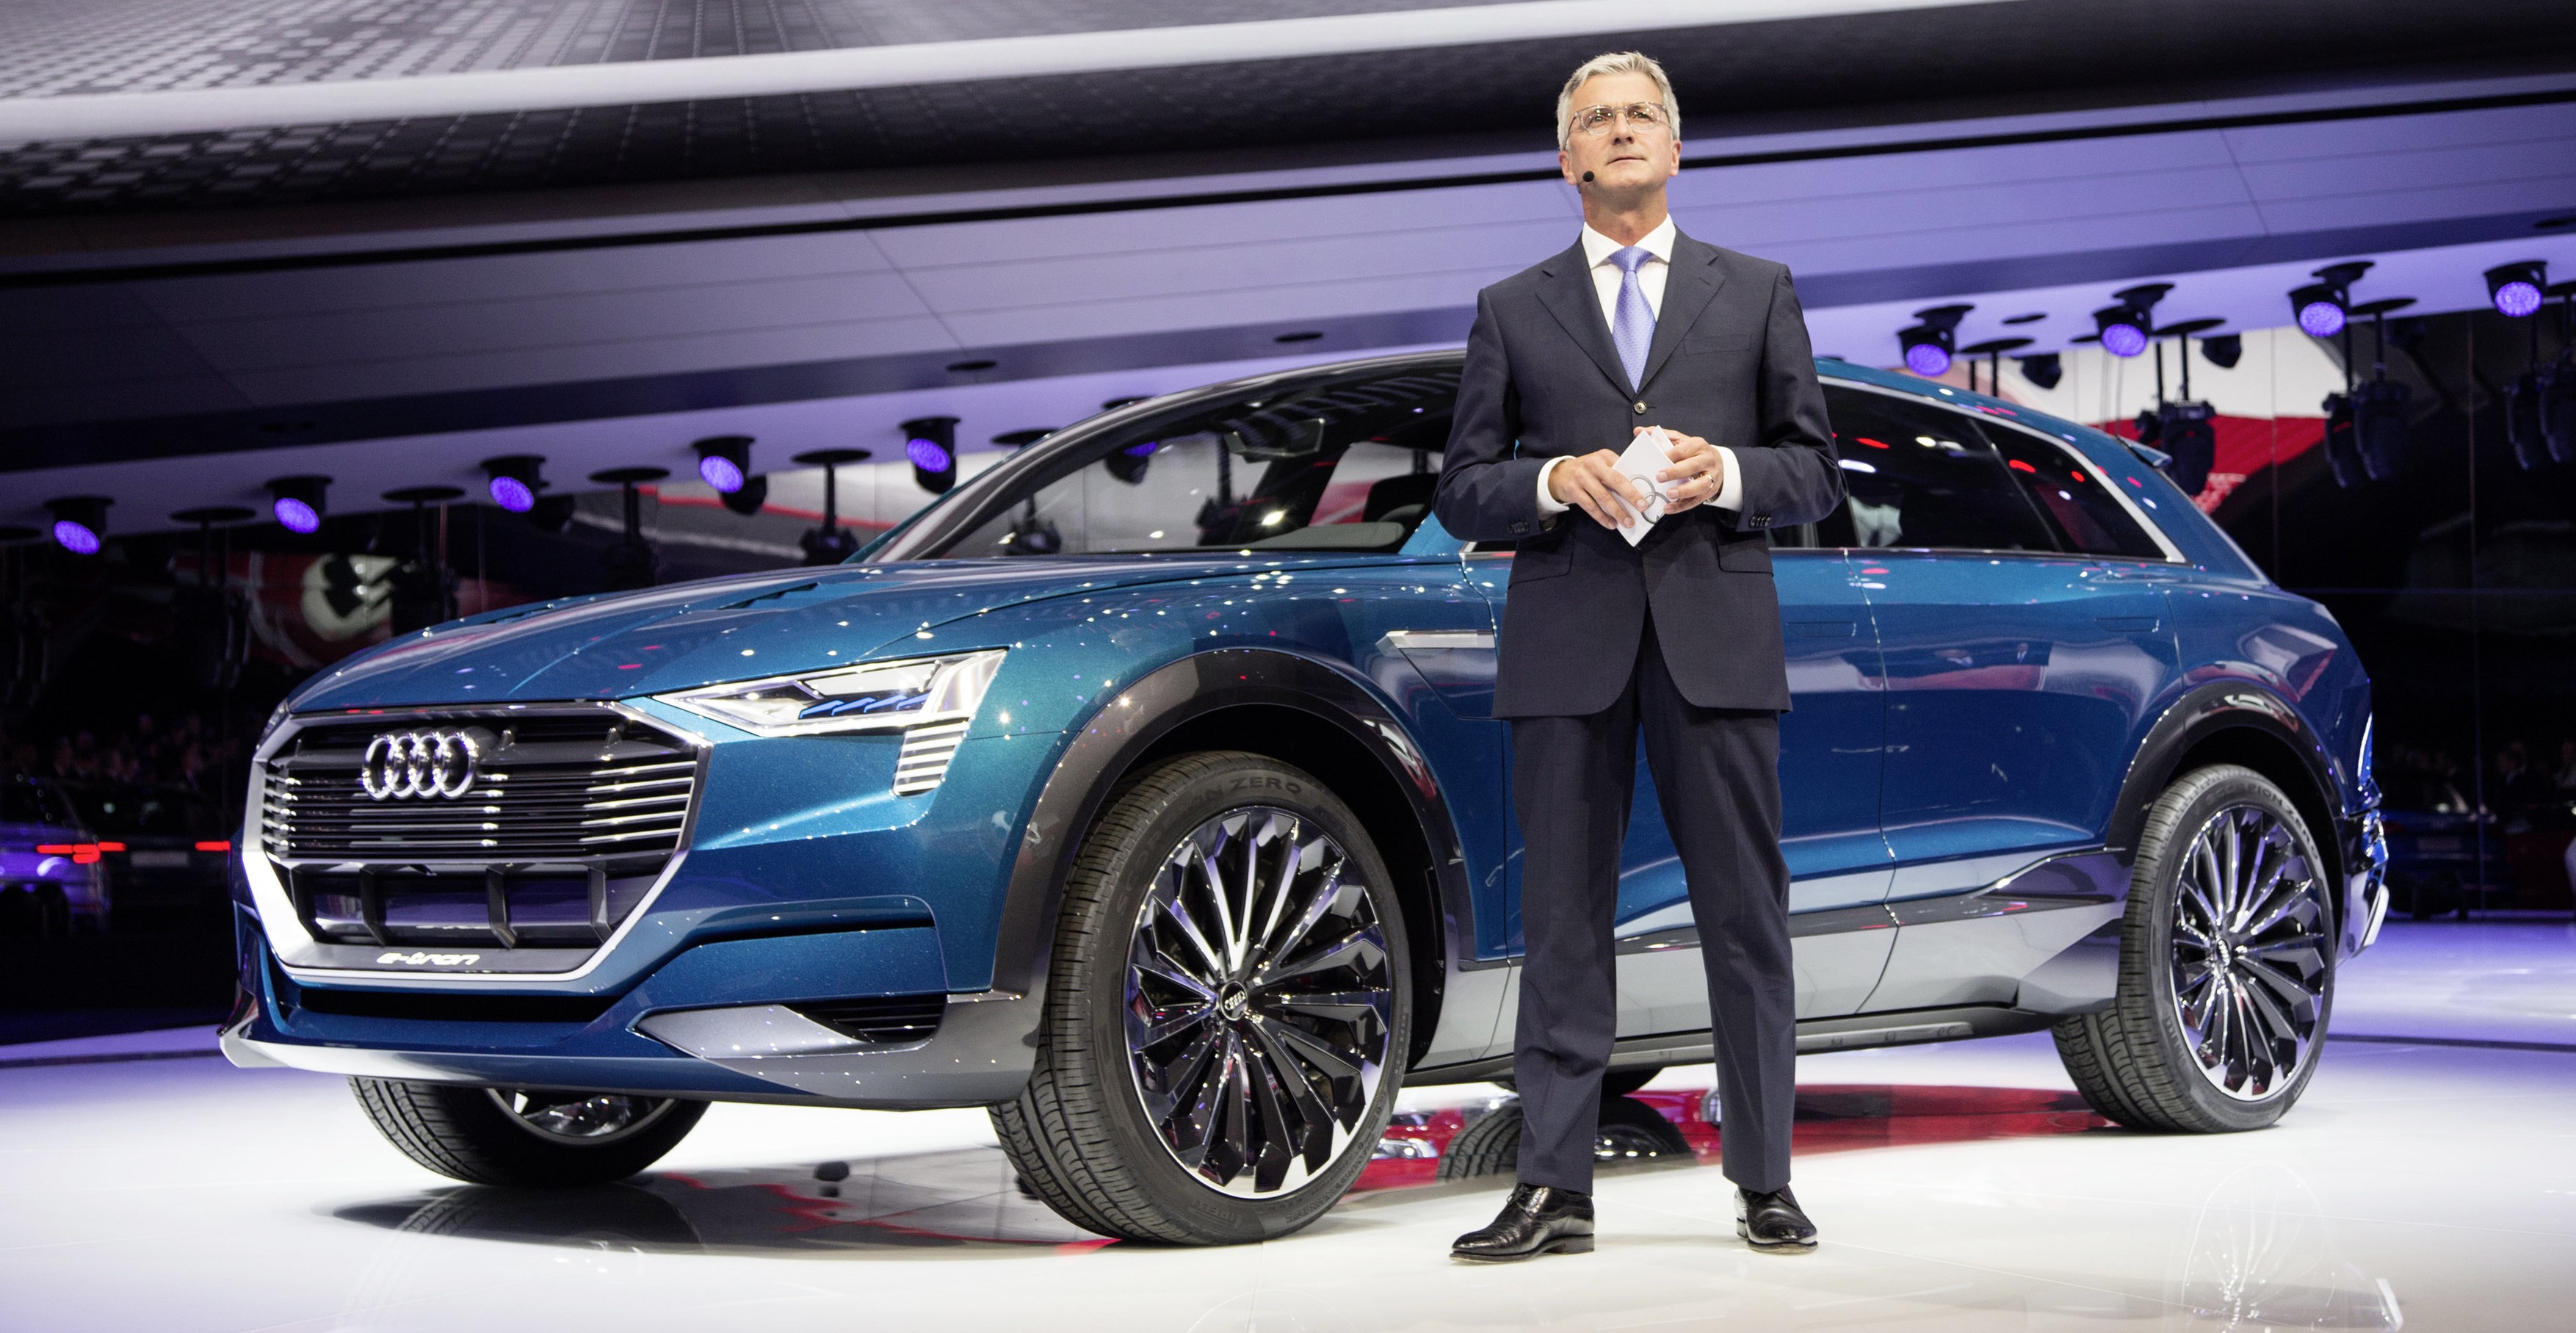 Prof. Rupert Stadler, Chairman of the Board of Management of AUDI AG, beside the concept car Audi e-tron quattro at the International Auto Show 2015 in Frankfurt/Main.